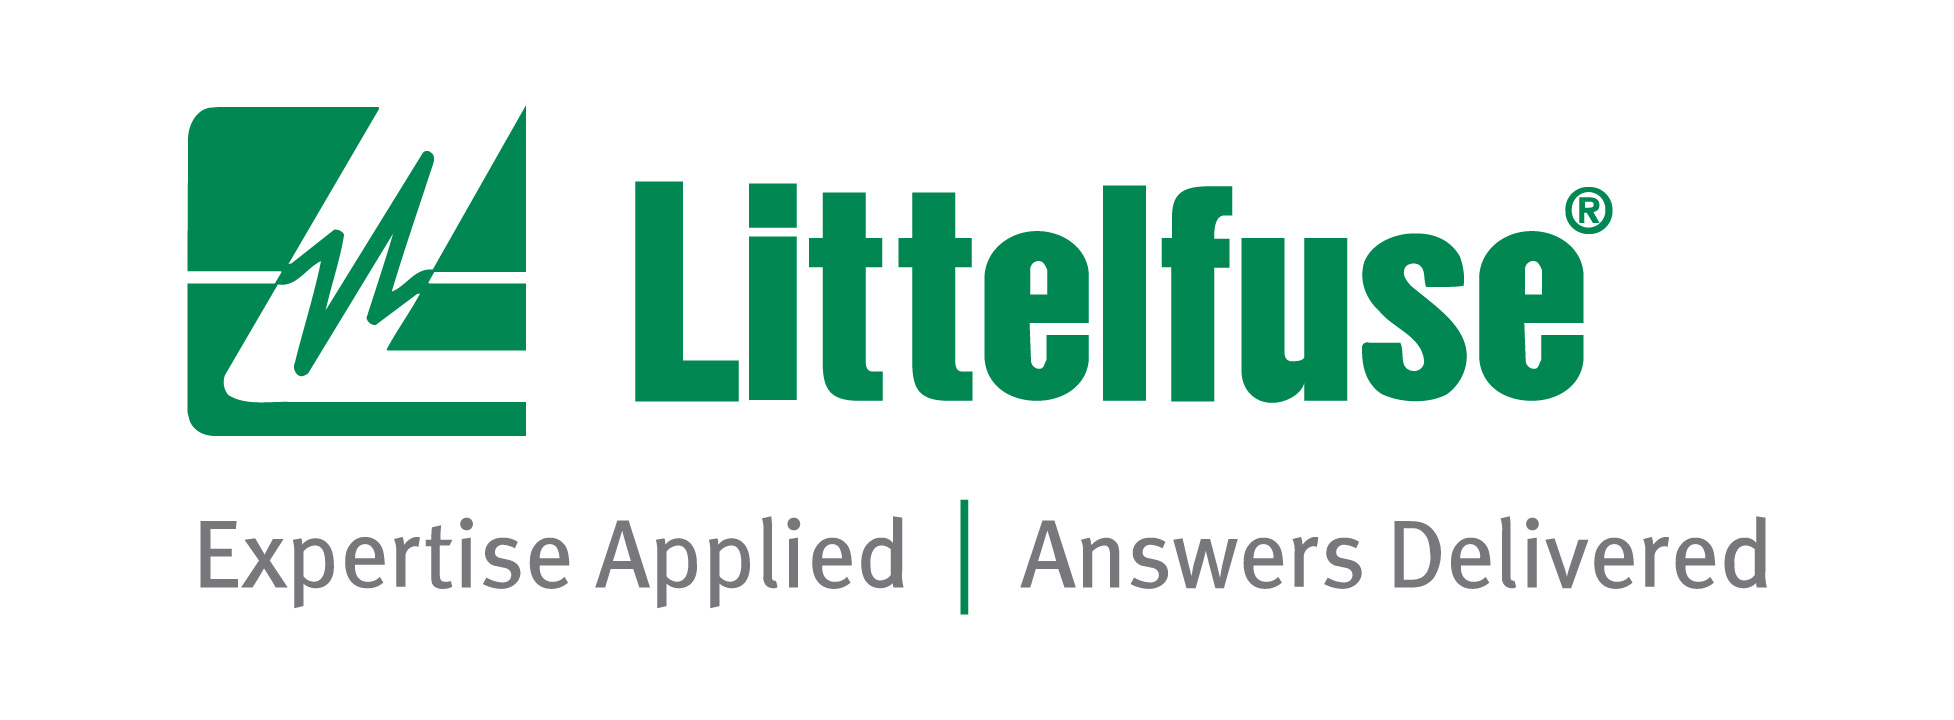 Show products manufactured by Littelfuse/CVP